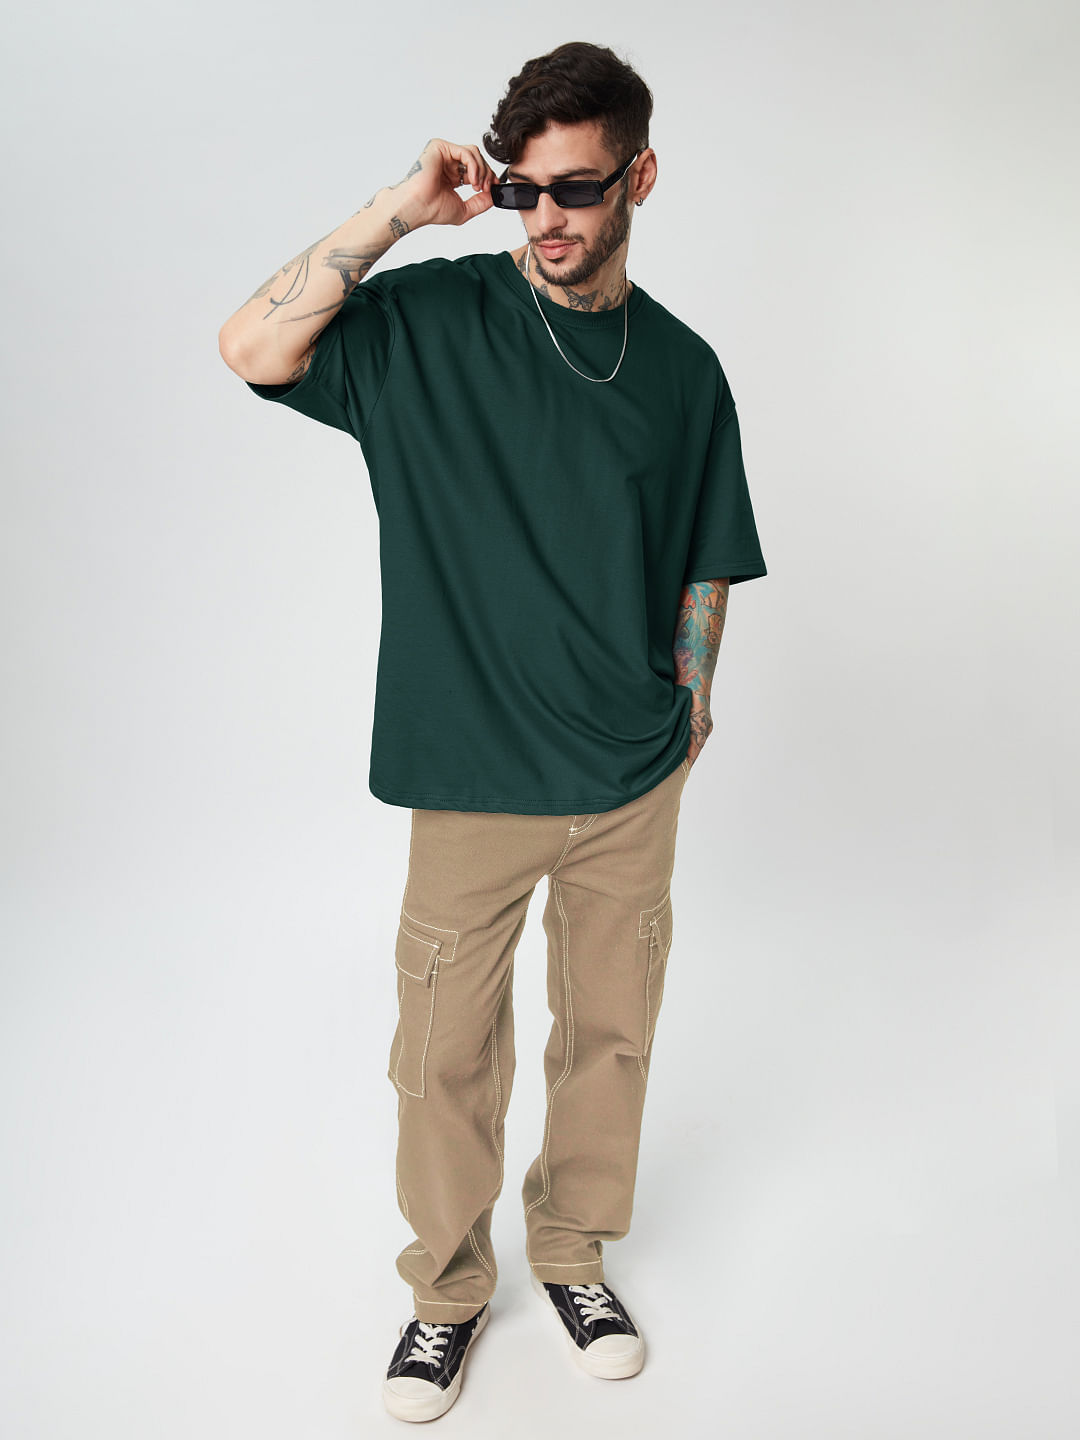 Buy Solids : Emerald Green Oversized T-Shirts Online